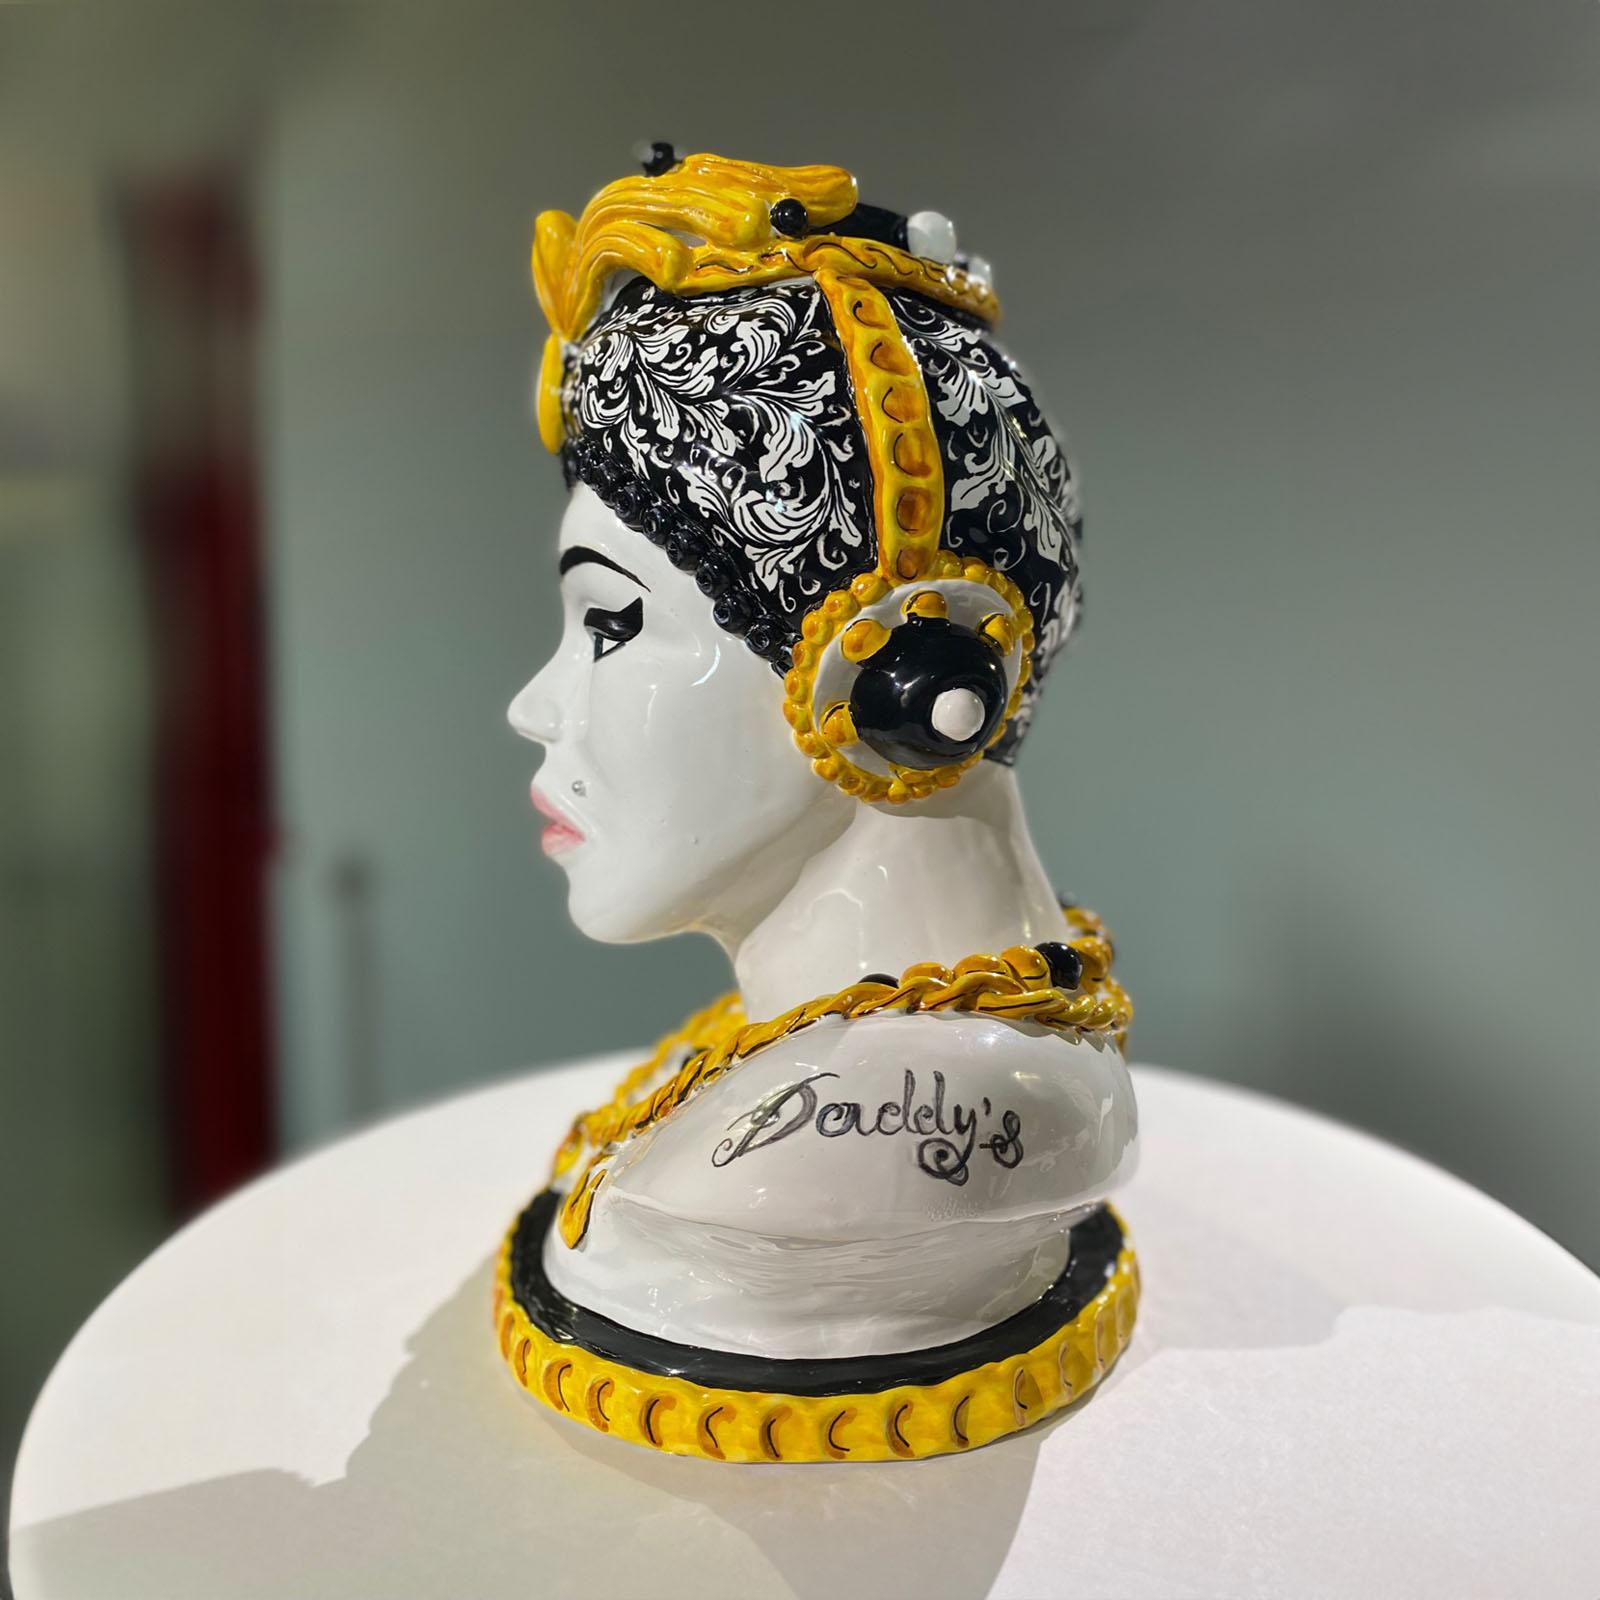 The “Surolù” art works - this is artistic identity chosen by Vanessa Semaino - arise from the artist 's need to represent women’s condition today, particularly in their emotional states that confer their unique identities. These precious ceramic